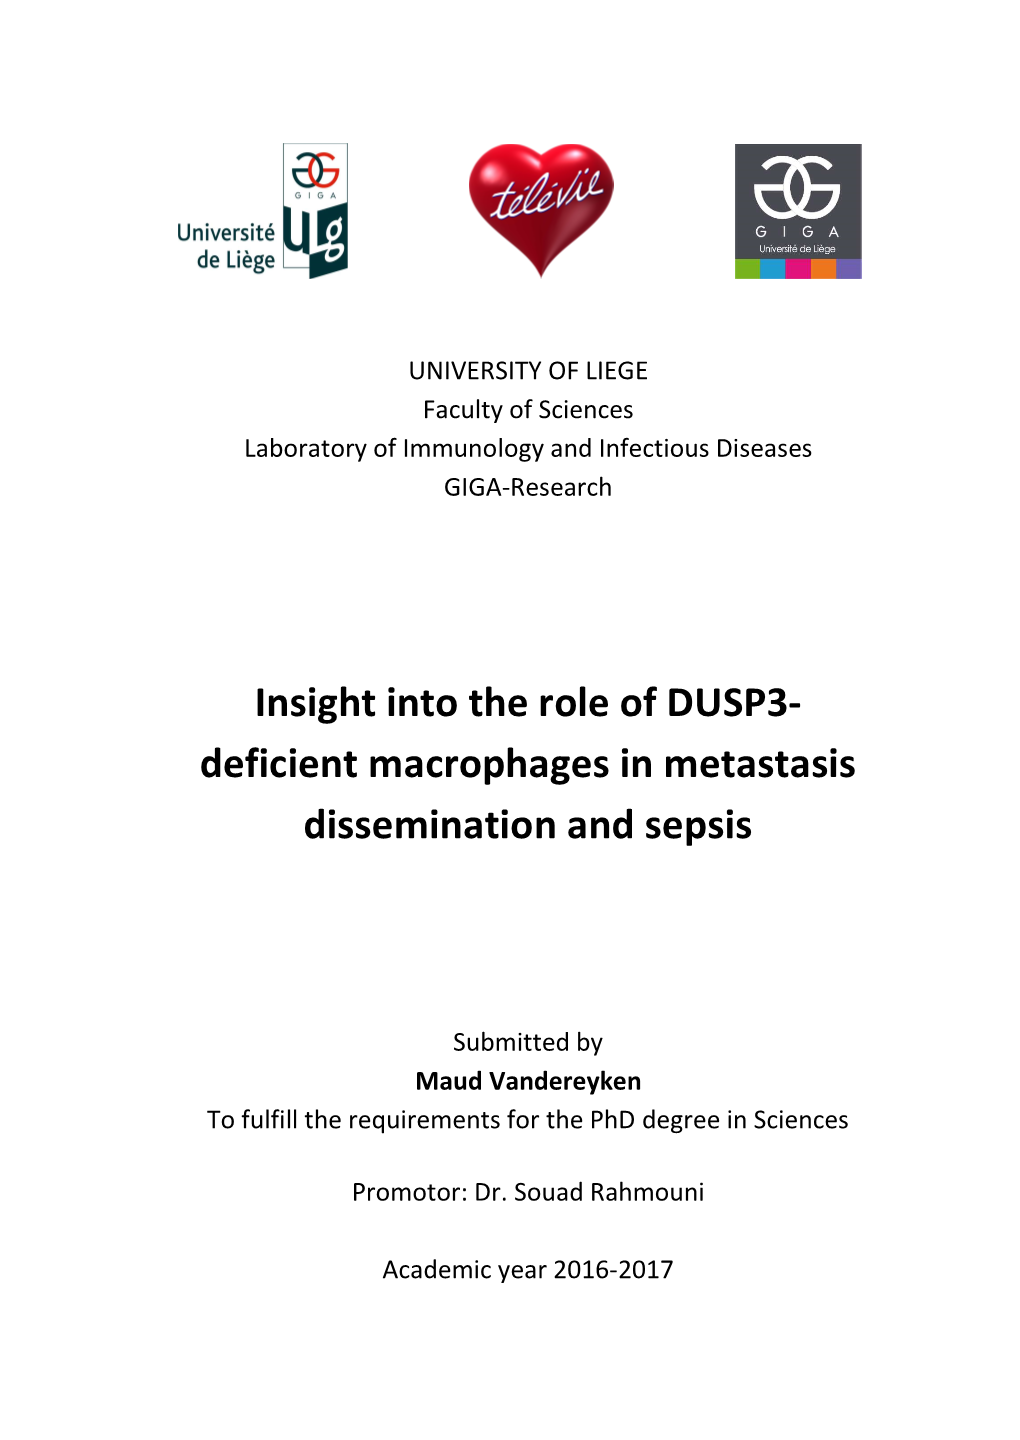 Insight Into the Role of DUSP3- Deficient Macrophages in Metastasis Dissemination and Sepsis